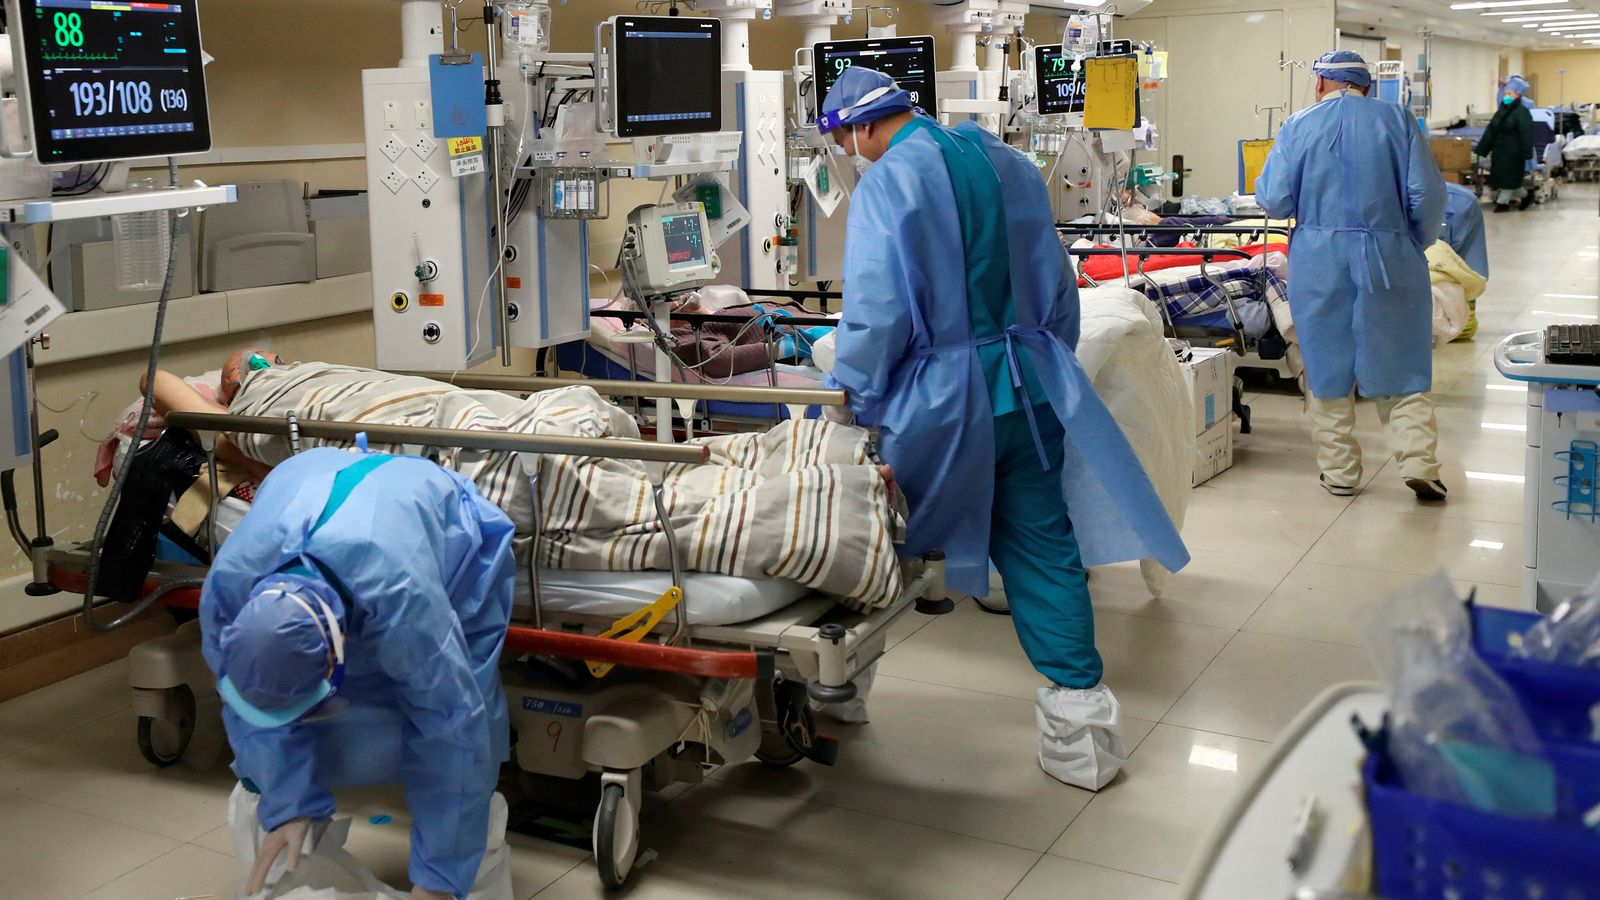 Doctors describe chaos in hospitals as COVID sweeps across China